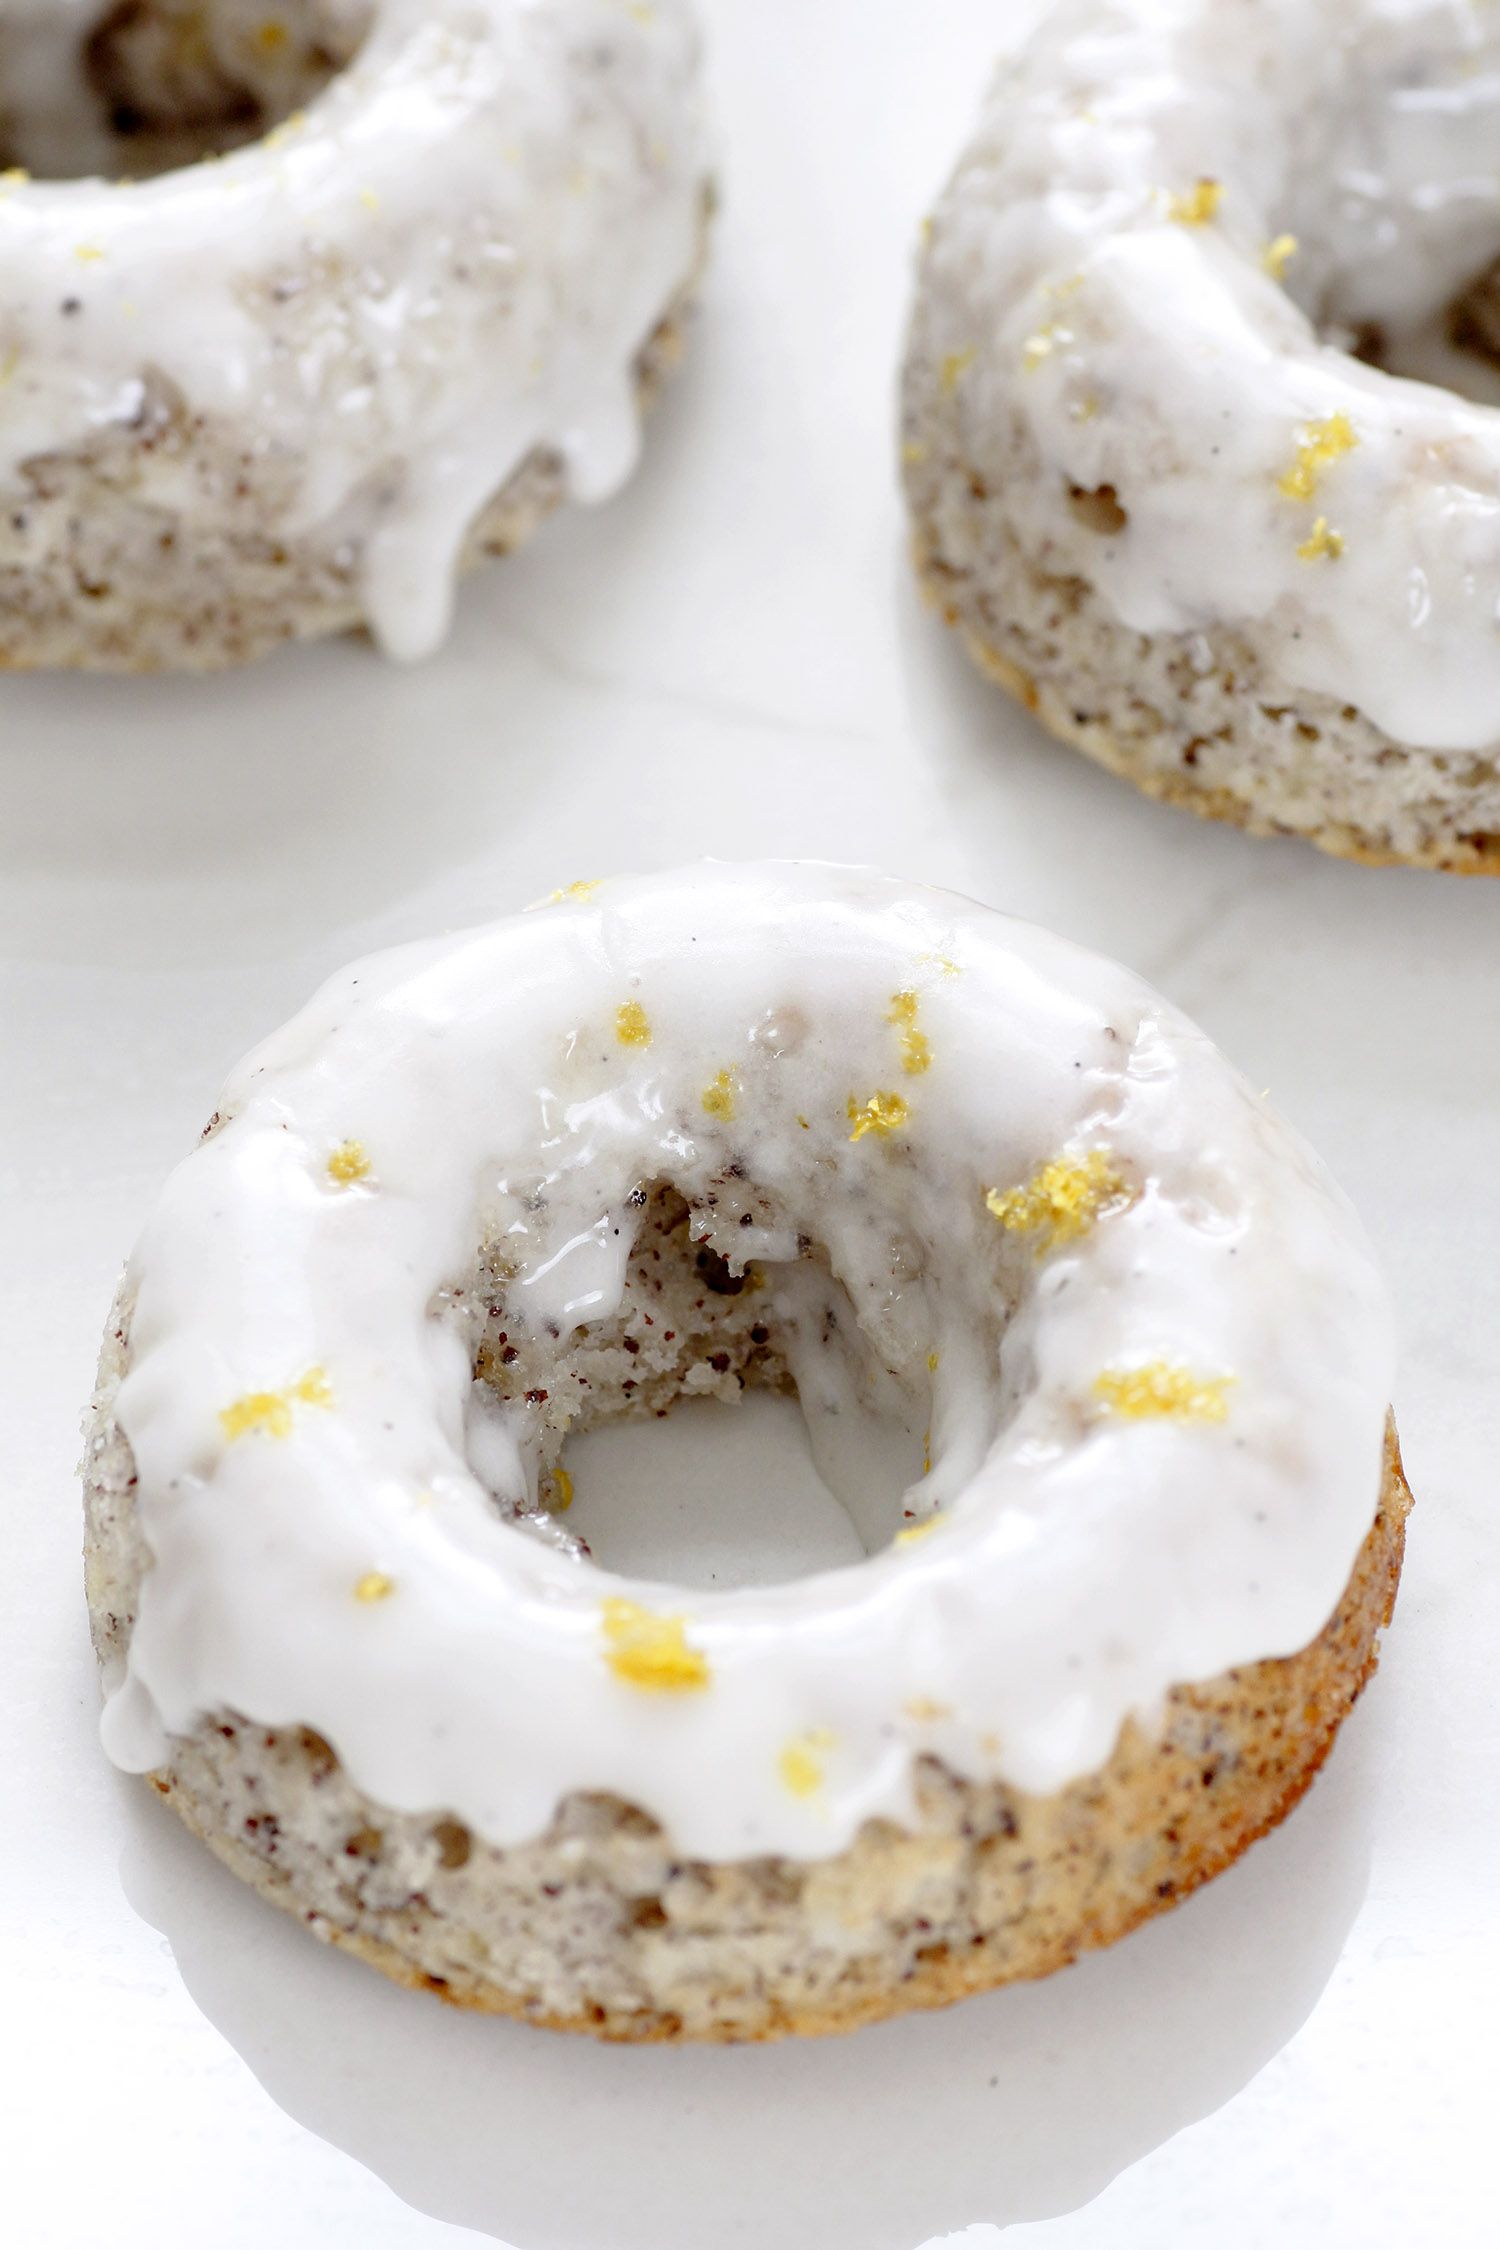 Lemon and Poppy Seeds Baked Donuts